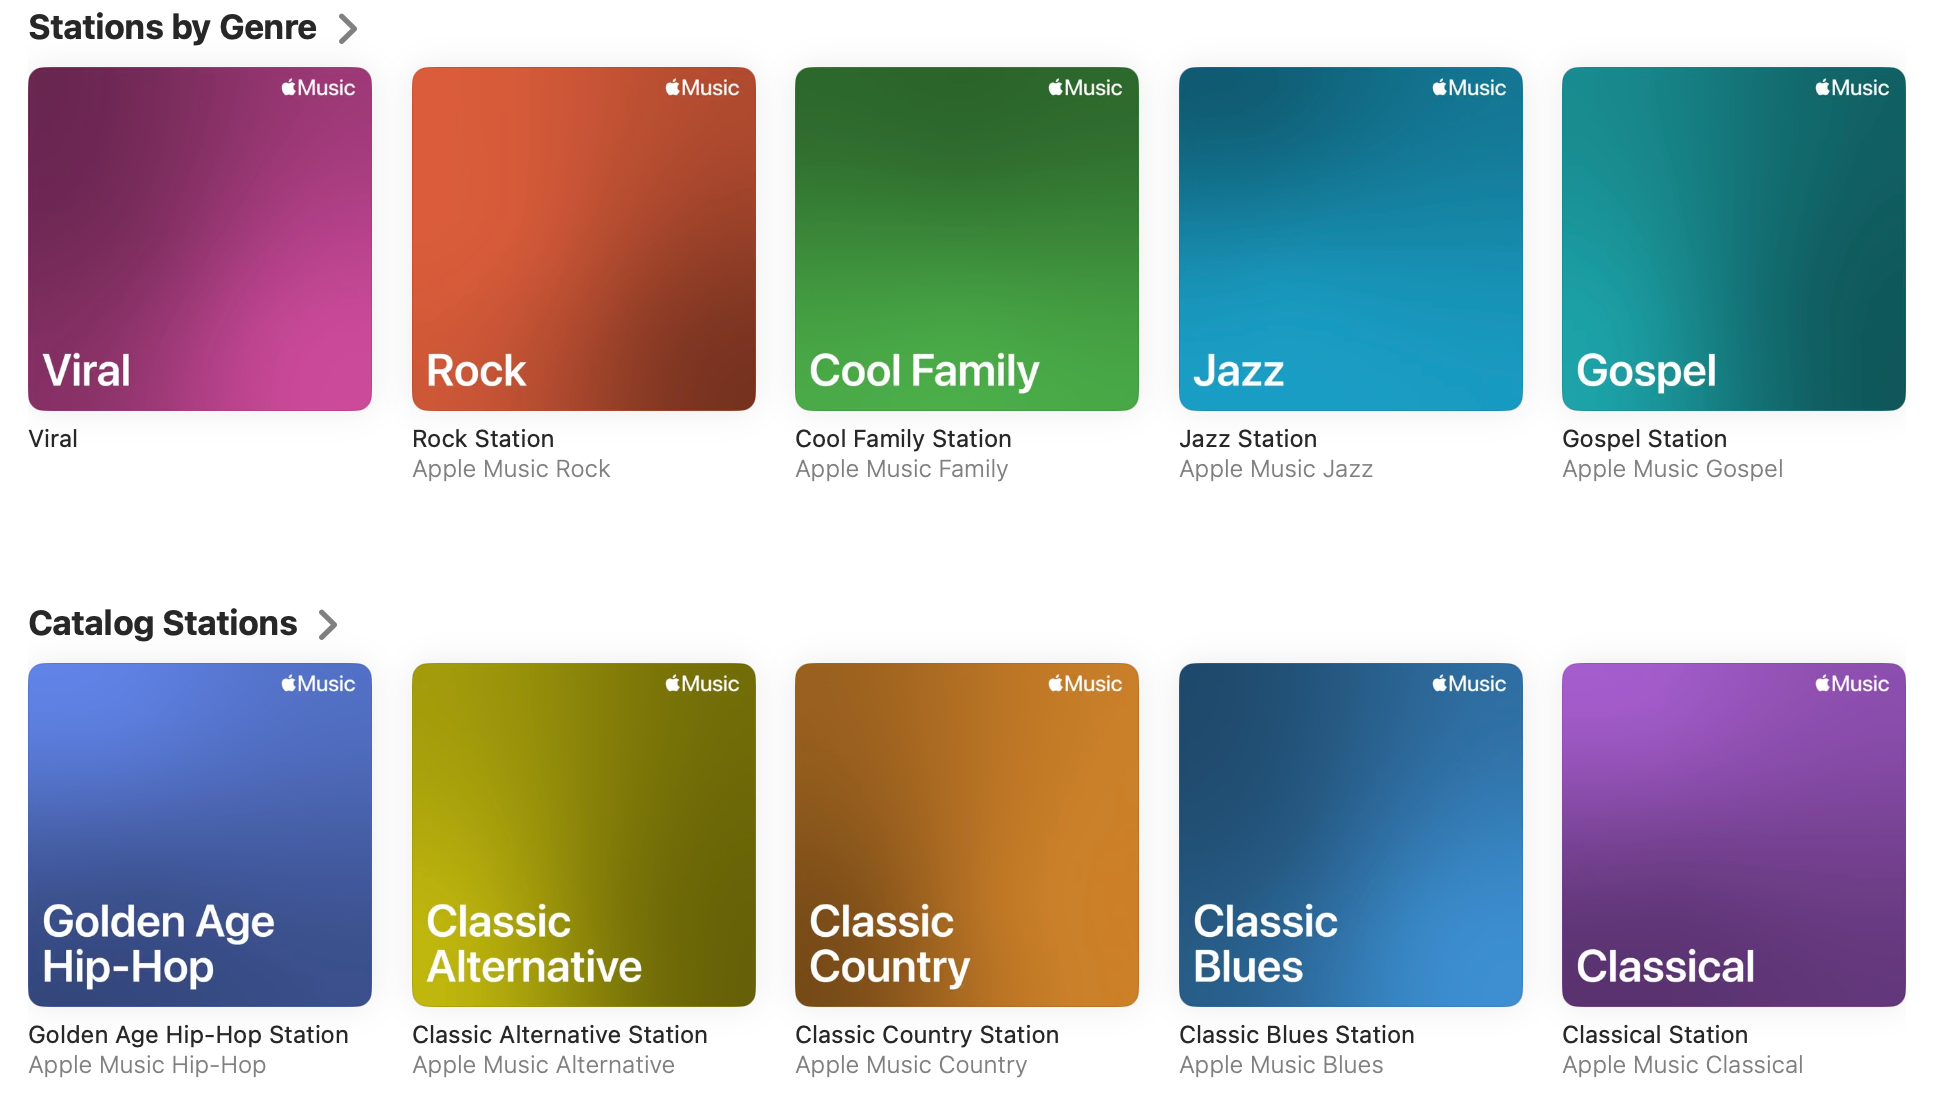 Apple Music selection of genre and catalog stations.